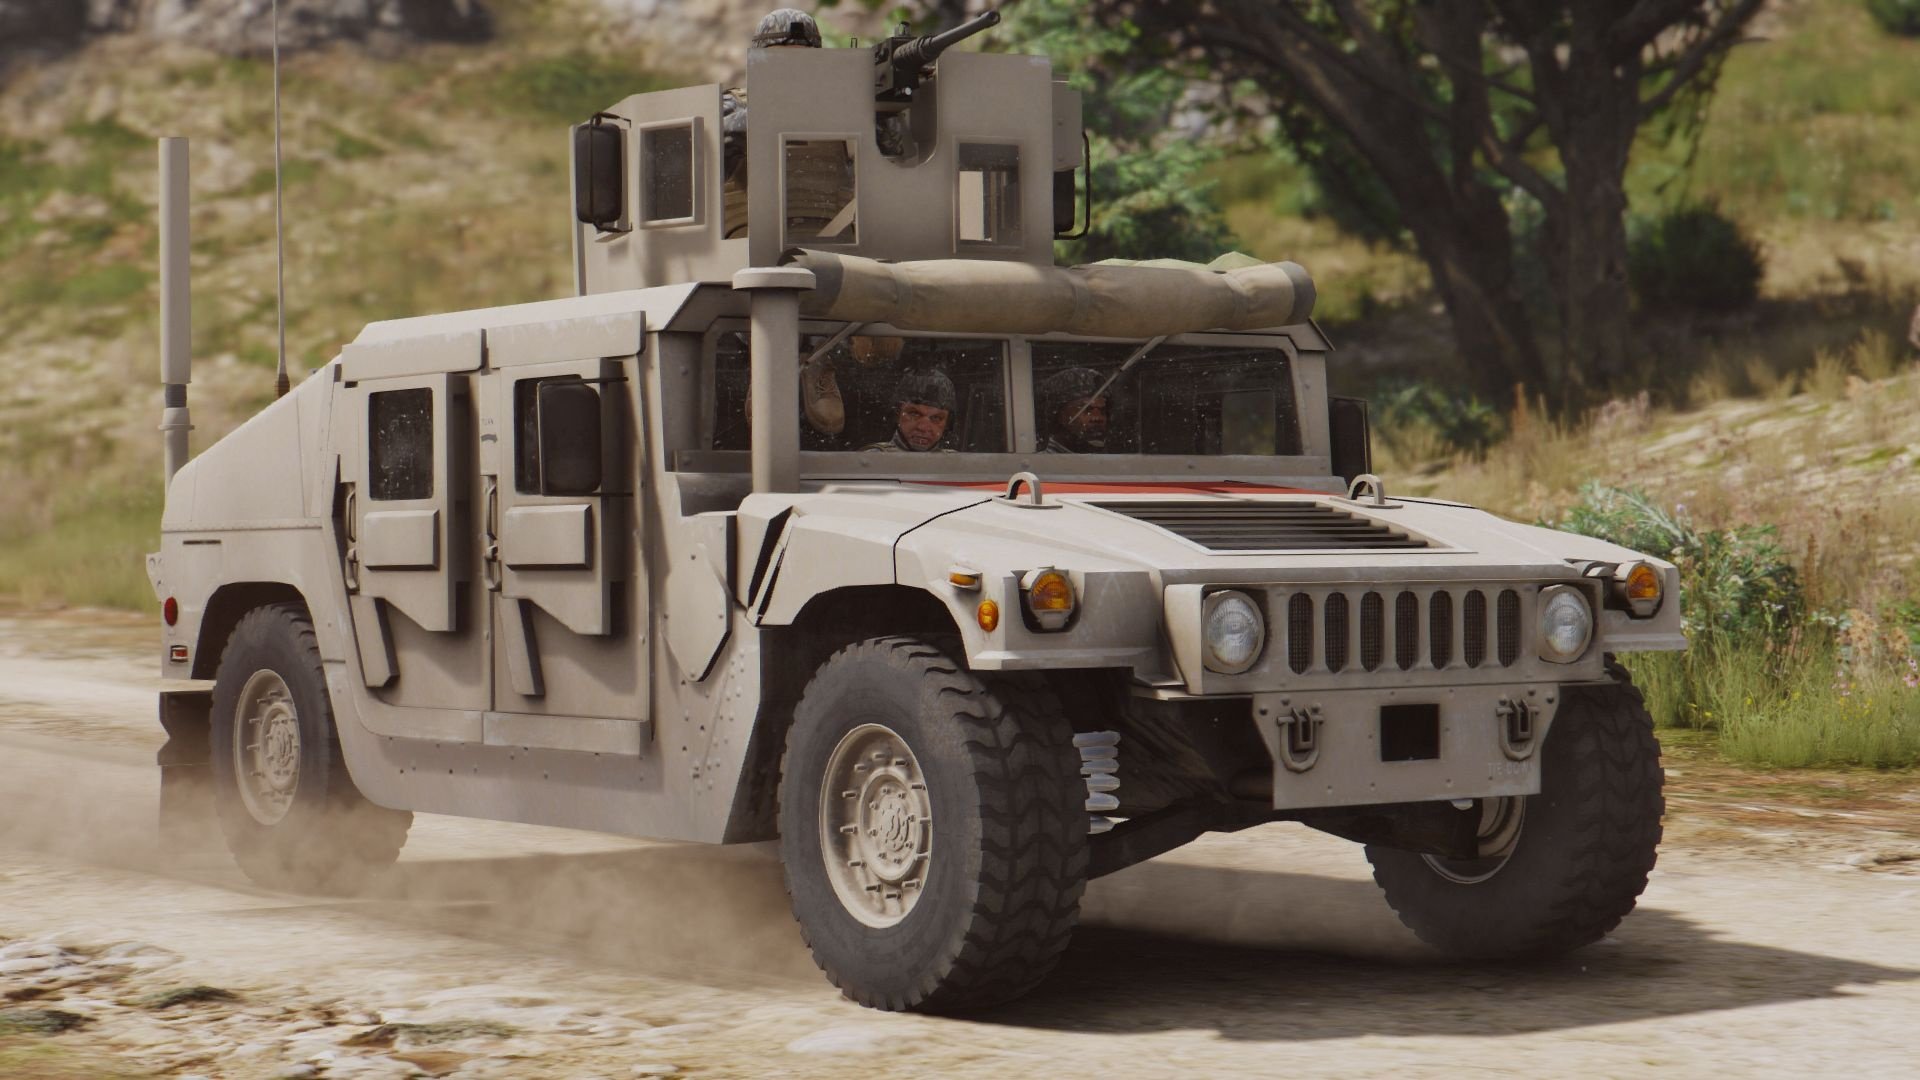 The Gun Running DLC in GTA 5 involves the upgrading of military ...